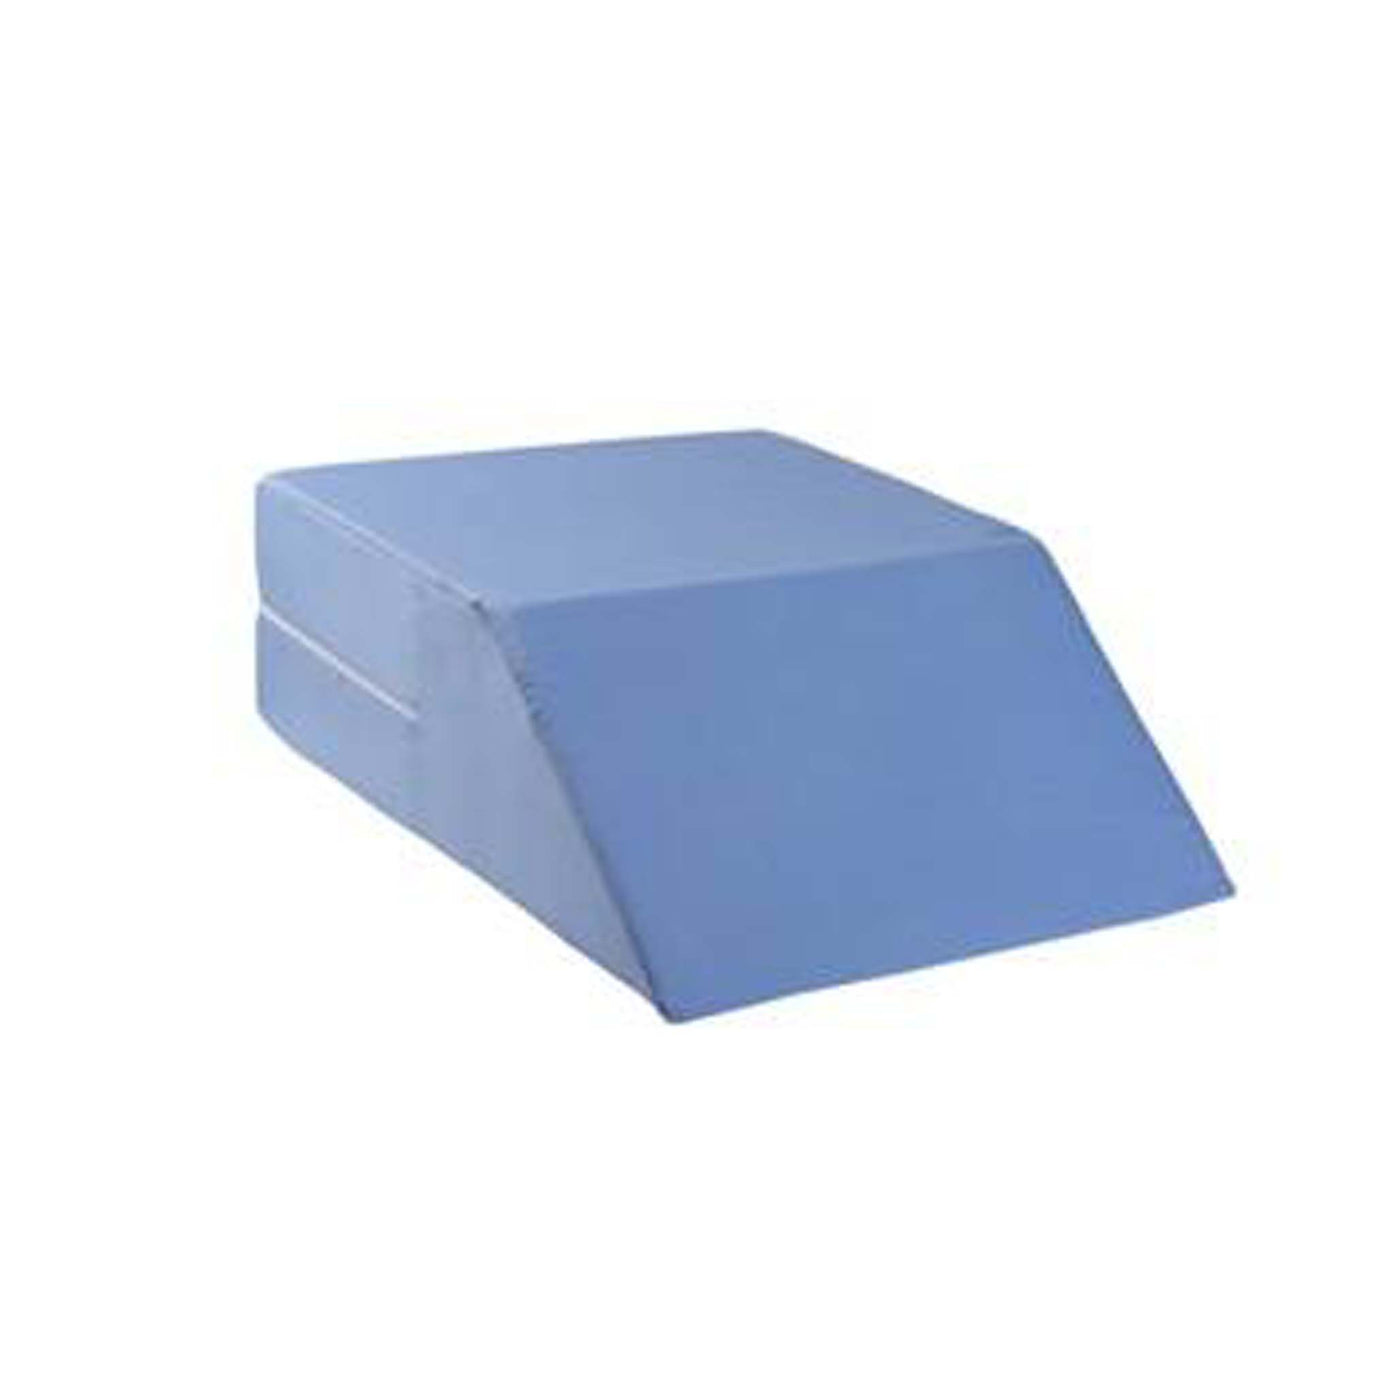 Leg Wedge Pillow by Alex Orthopedic™ at Meridian Medical Supply